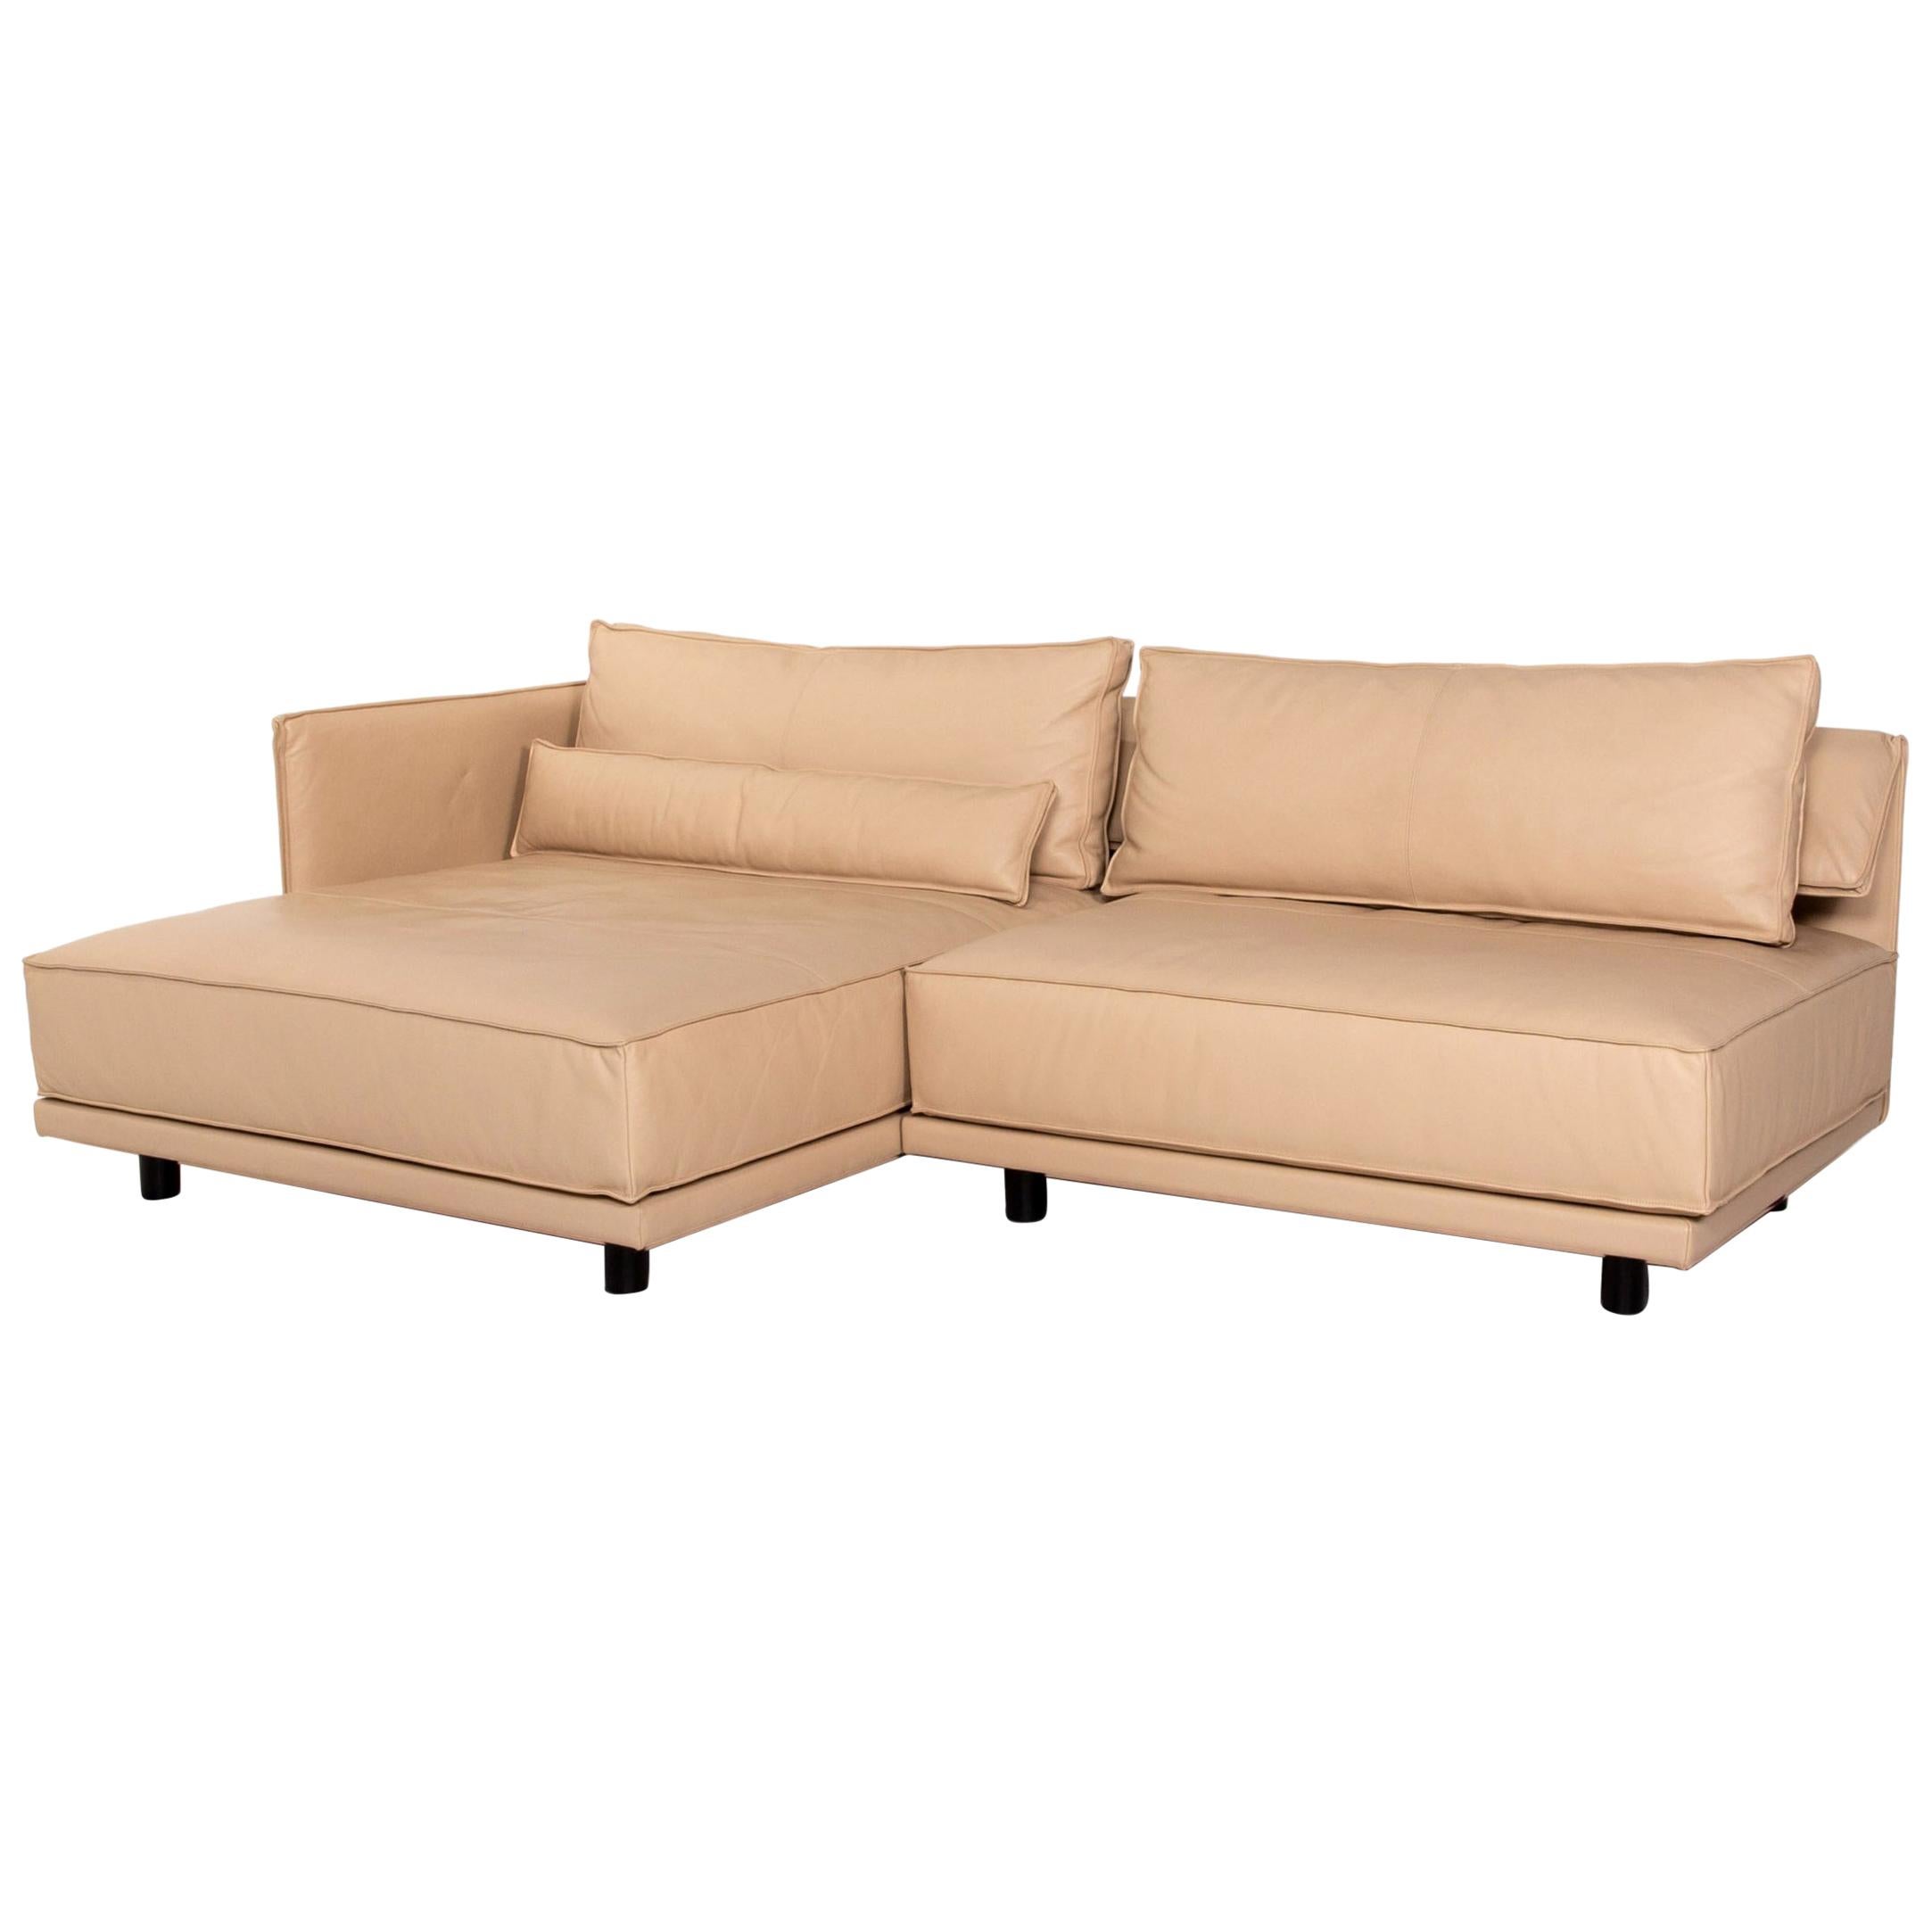 IP Design Cube Lounge Leather Corner Sofa Beige Sofa Couch For Sale